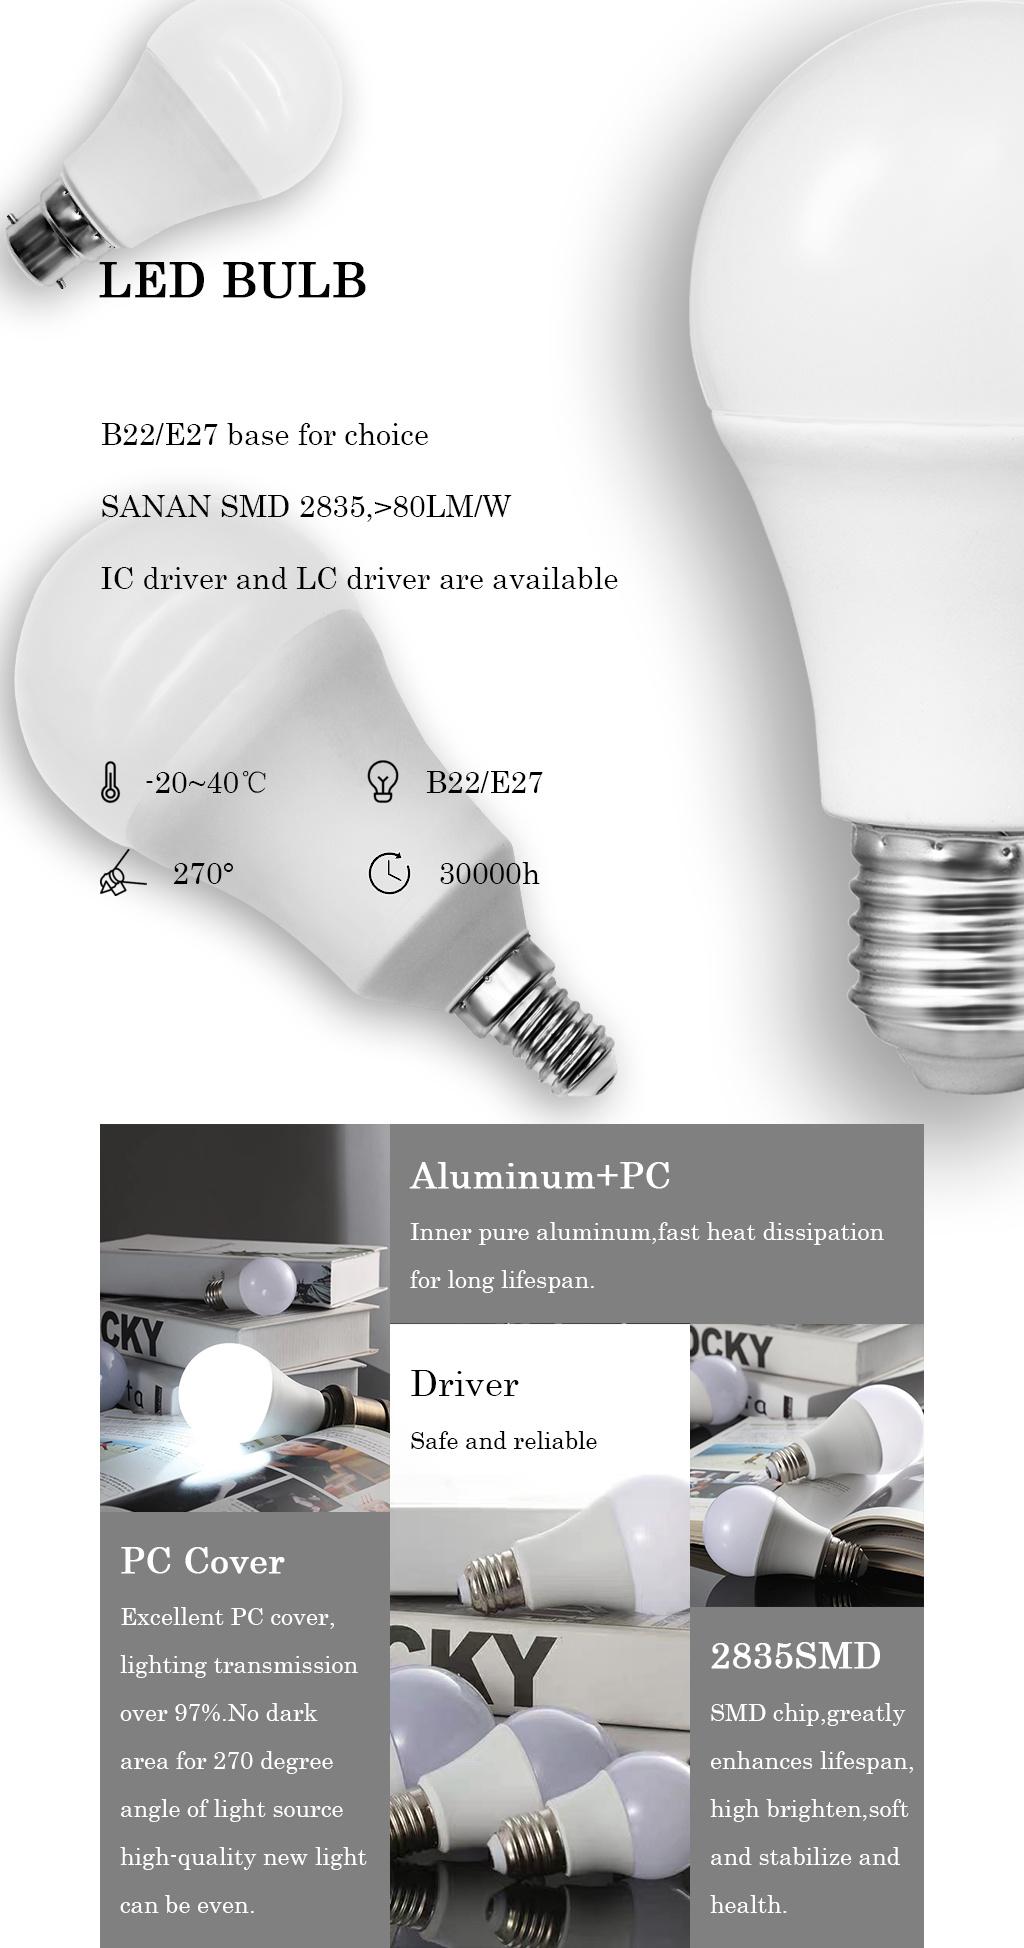 China Manufacturer Made LED Lamp A60 9W SMD LED Bulb Light Luz with New ERP